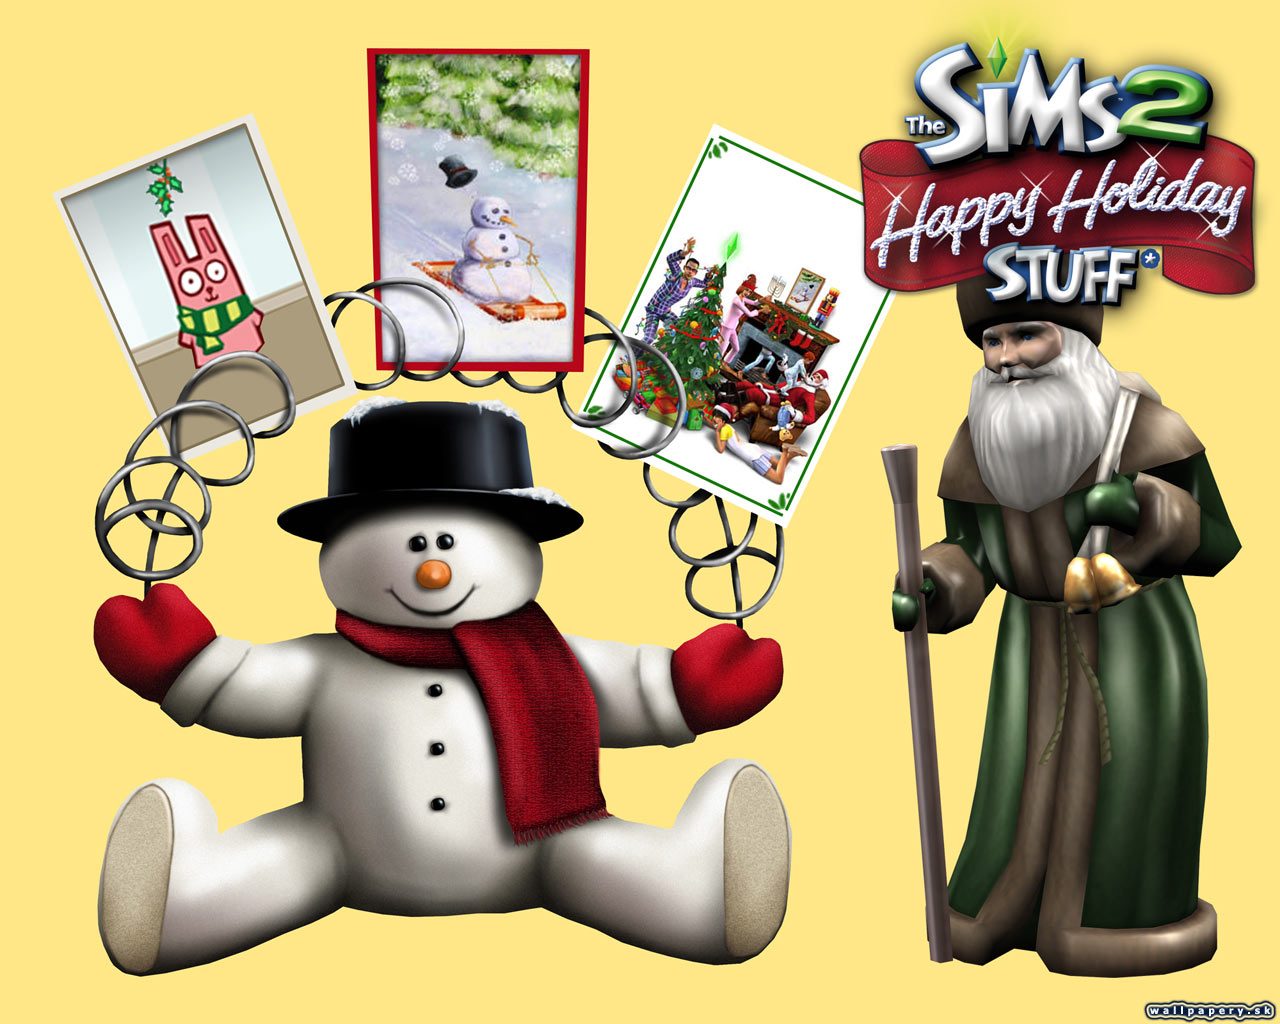 The Sims 2: Happy Holiday Stuff - wallpaper 6